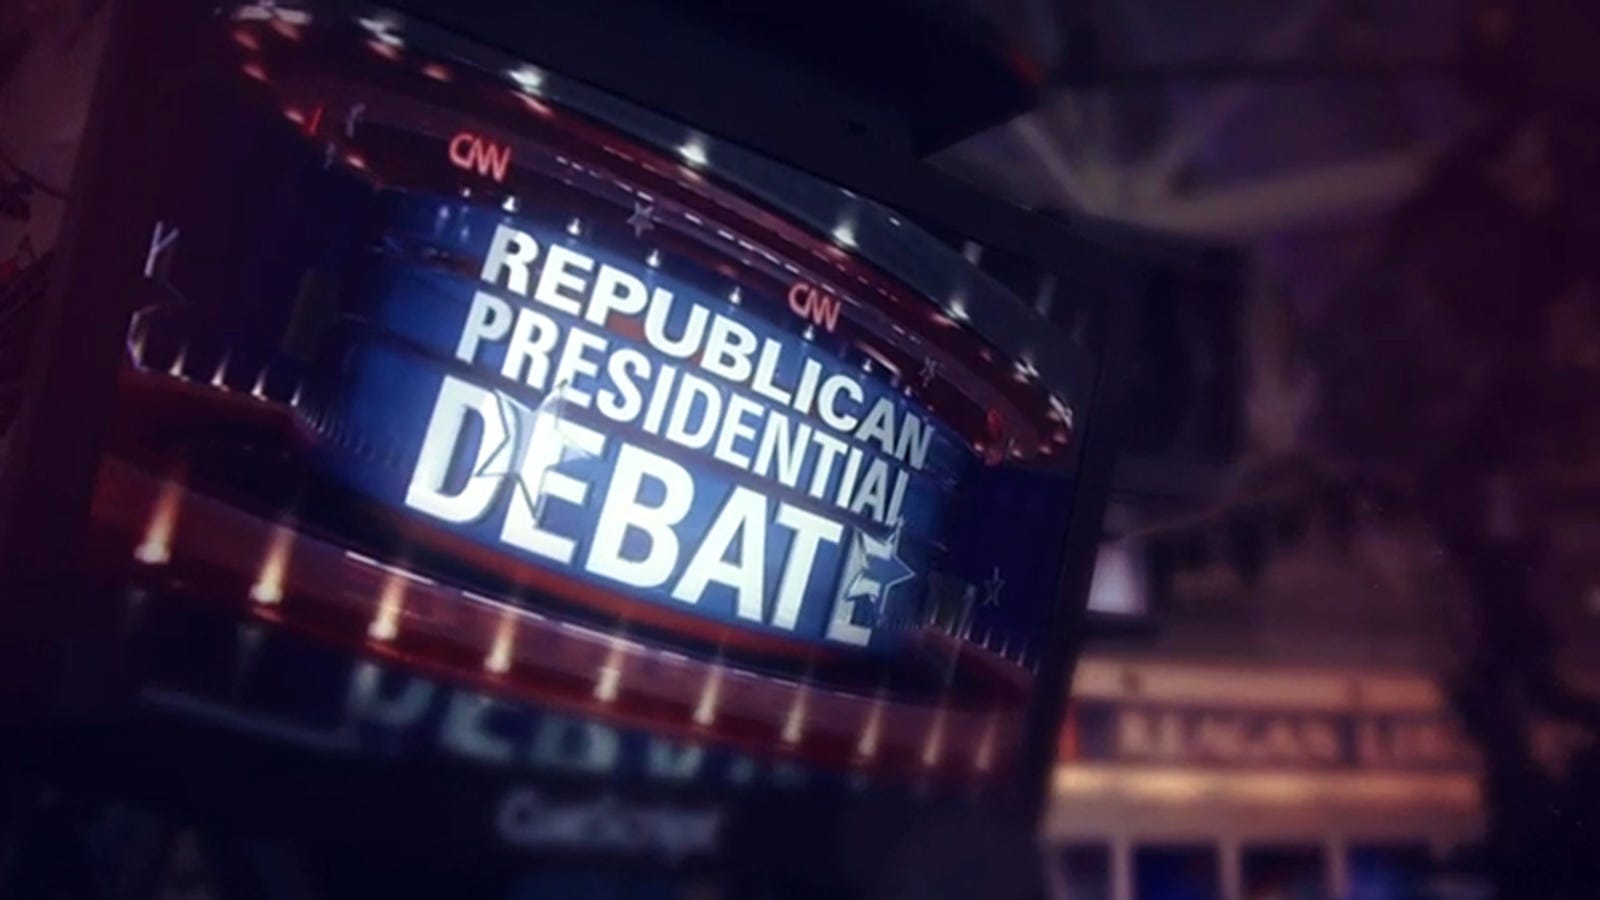 How to Stream Tonight's CNN Republican Debate Online, No Cable Required